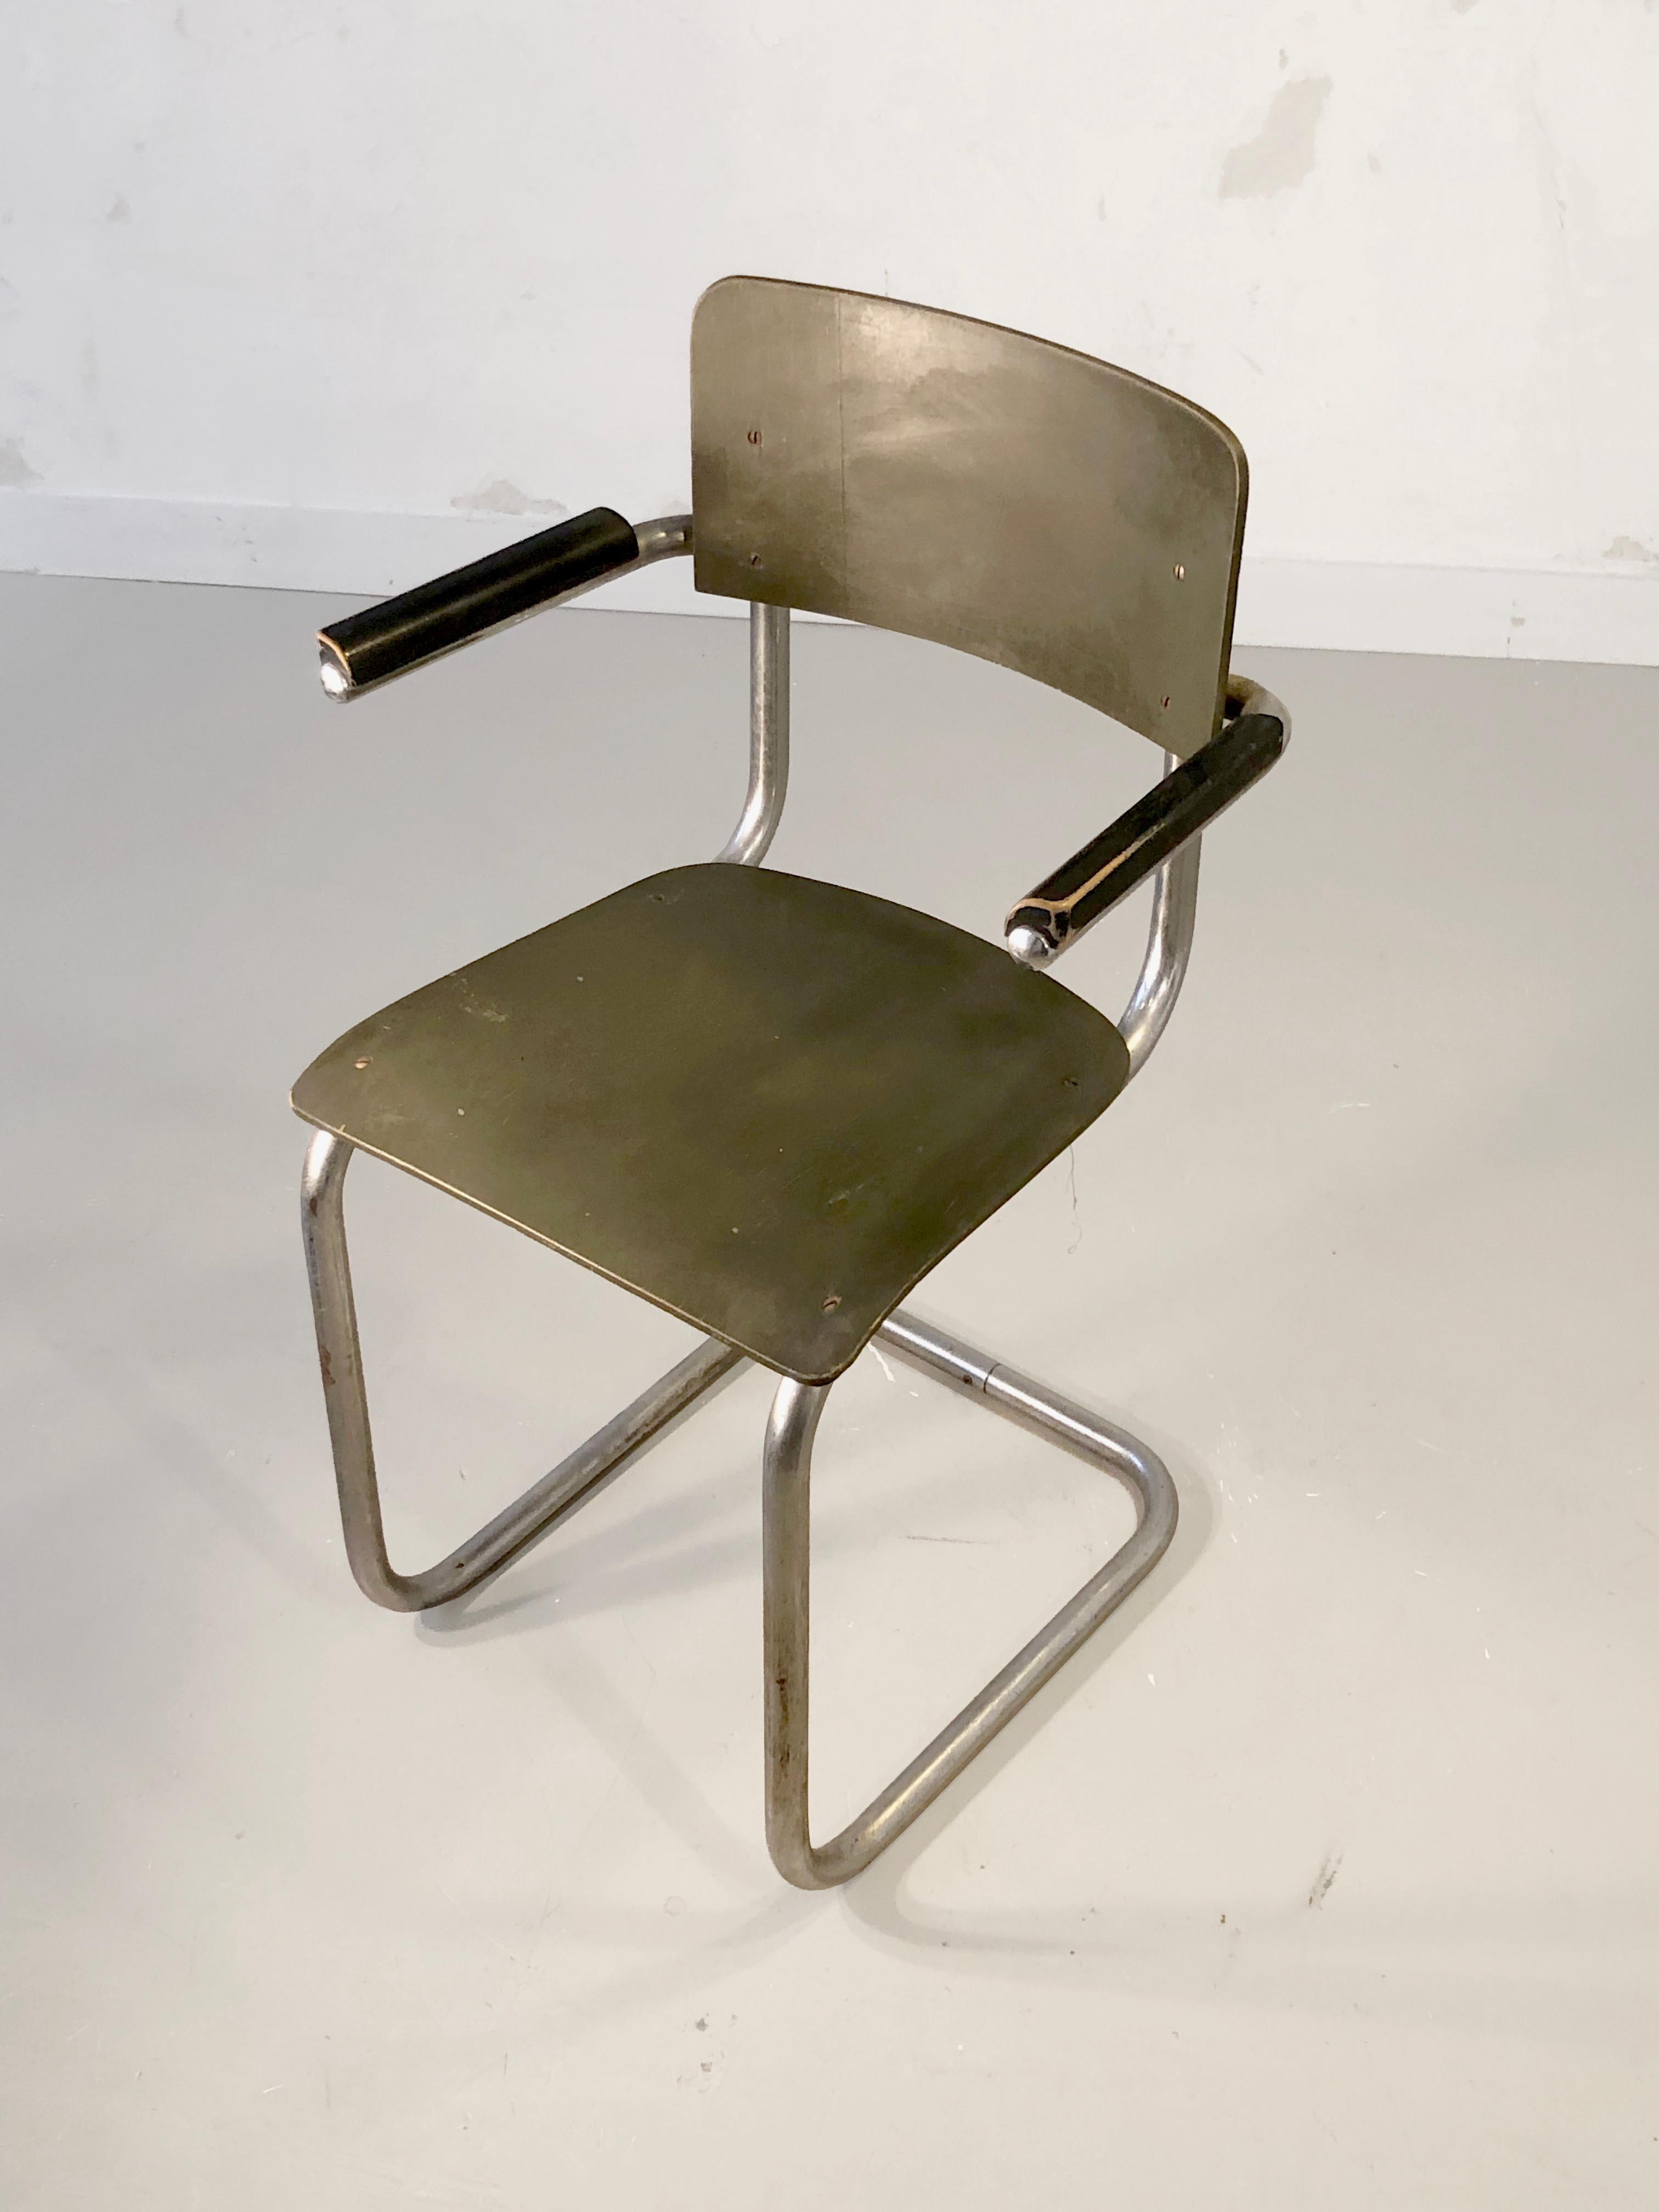 An Early MODERNIST BAUHAUS CHAIR by MART STAM for MAUSER WERKE, Germany 1930 For Sale 6